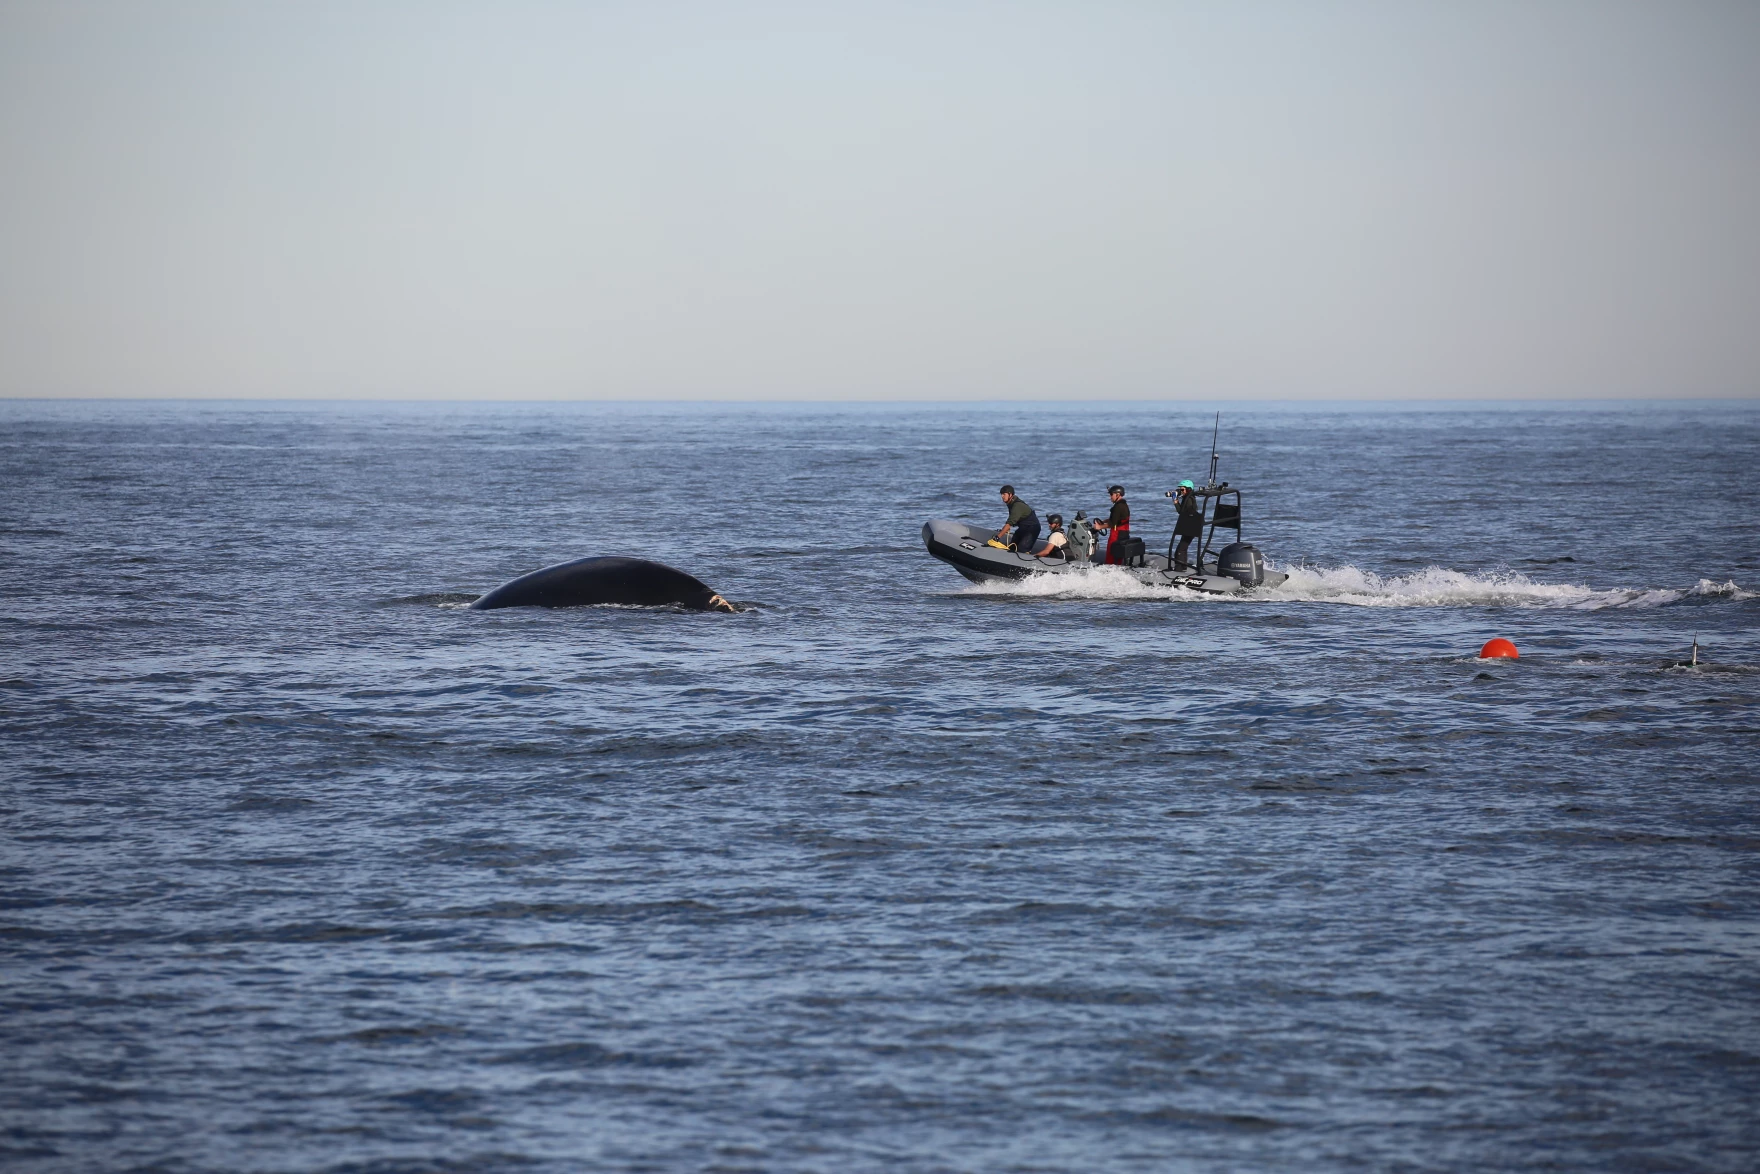 The Georgia Department of Natural Resources led a disentanglement response for Nimbus, a right whale that was spotted entangled in some 375 feet of fishing line off the Georgia coast on Jan. 20, 2023.